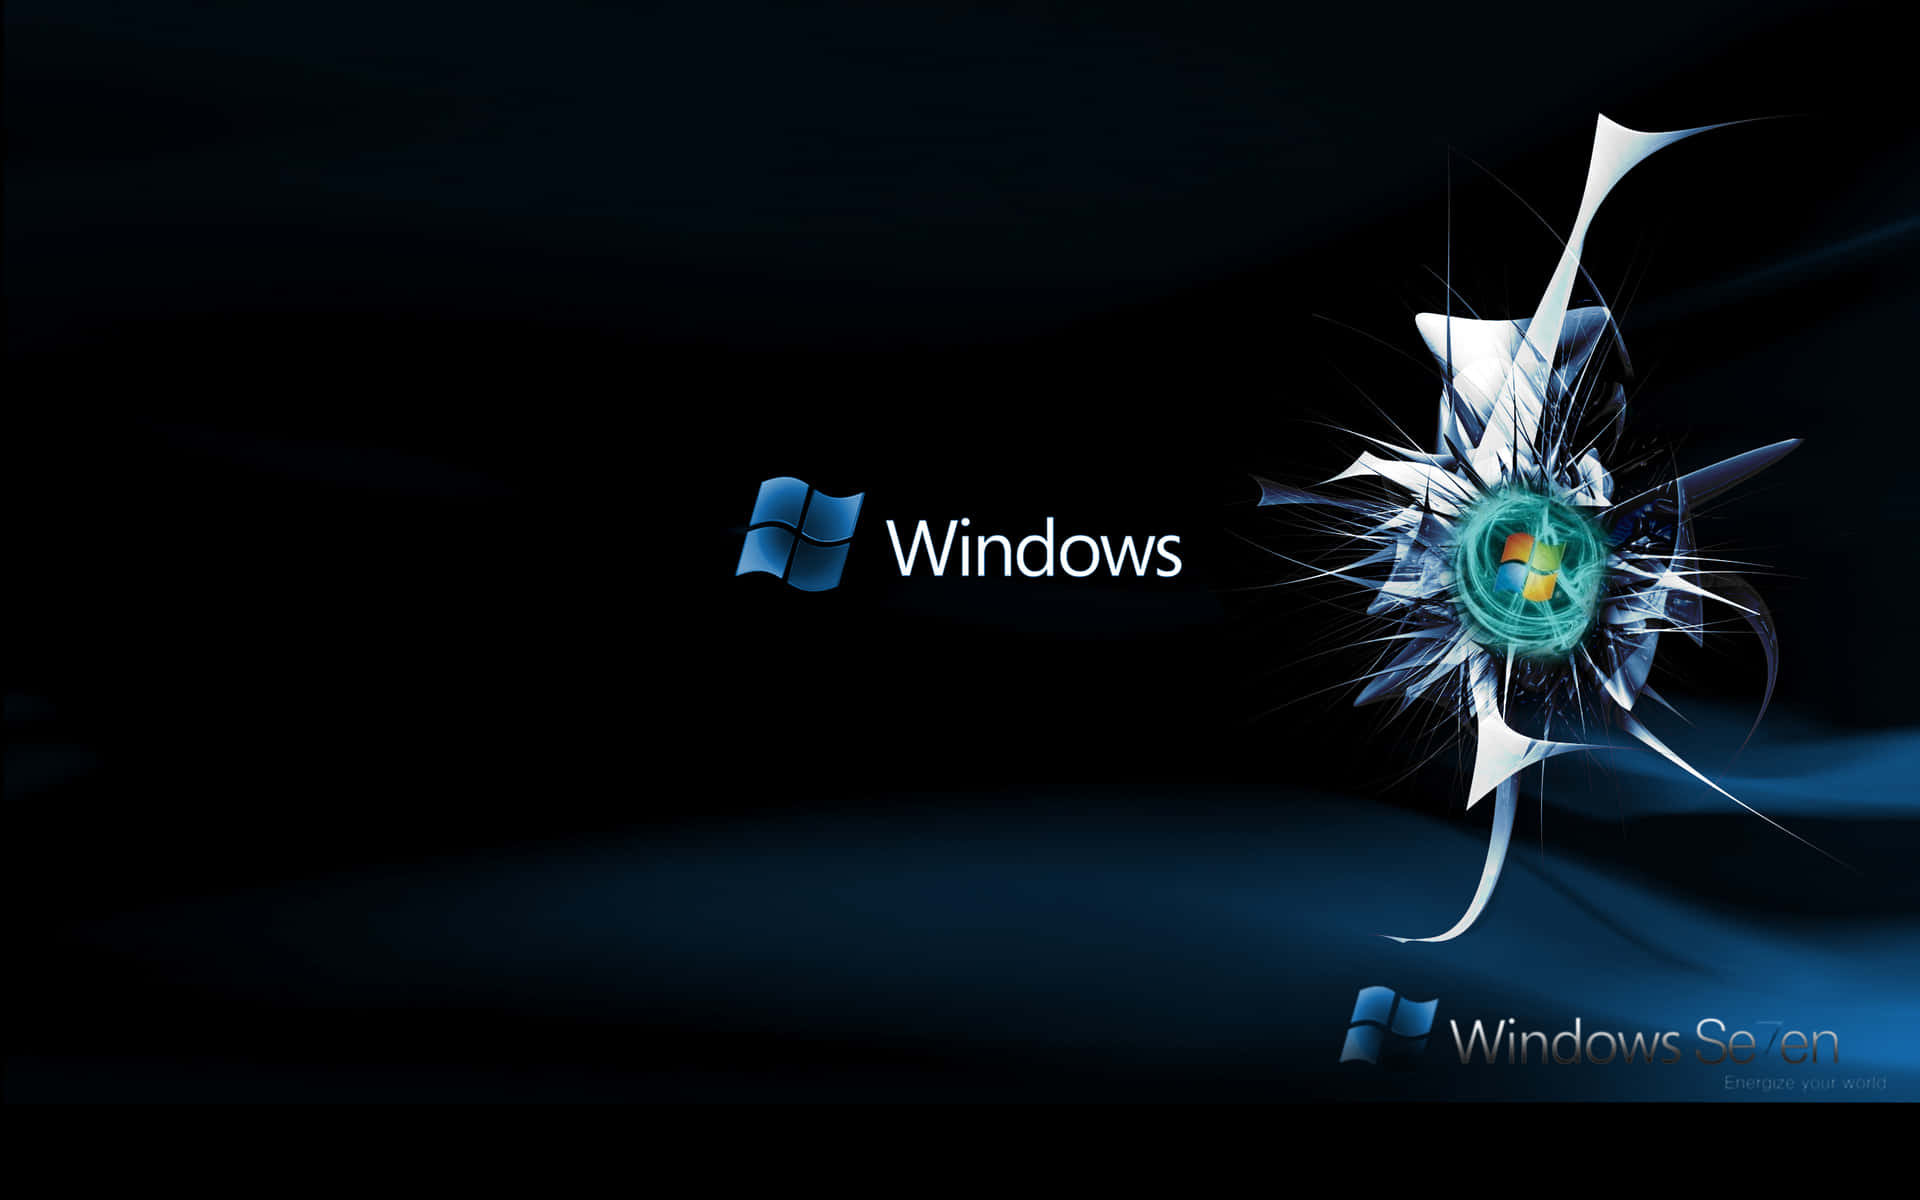 Enjoy a clean and crisp desktop experience with Windows 7